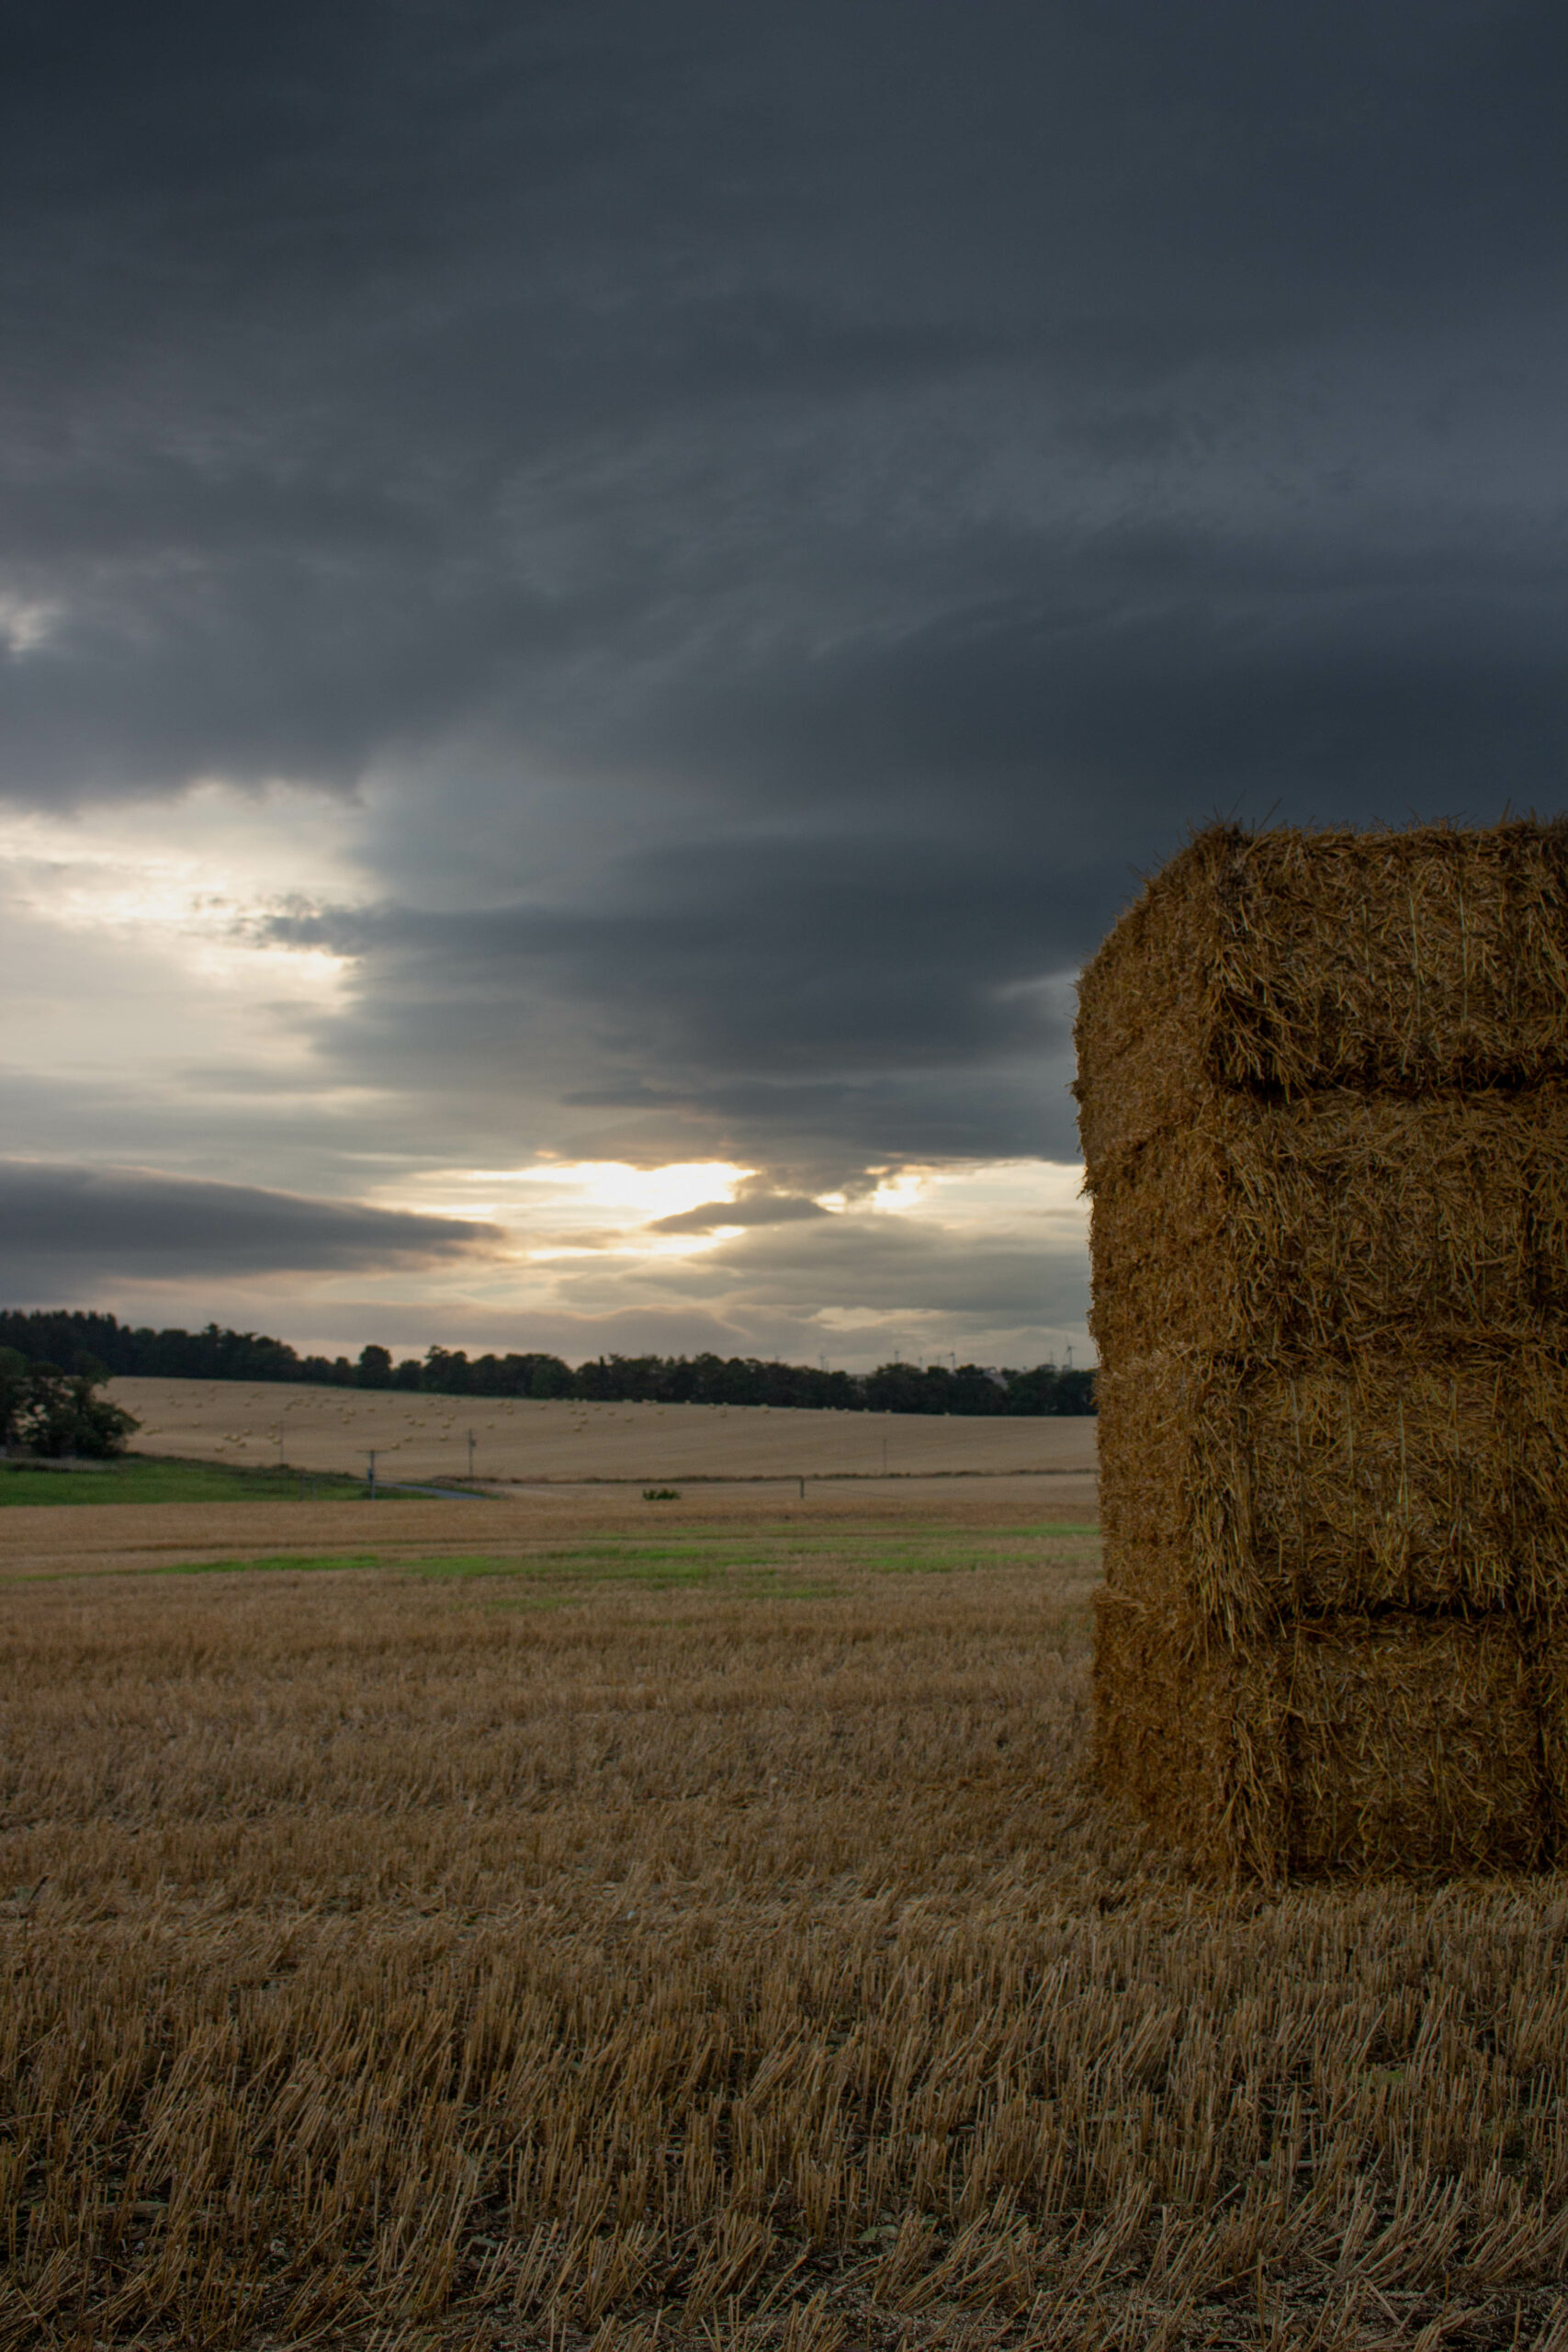 Sunset with Dark clouds over farm land and bales